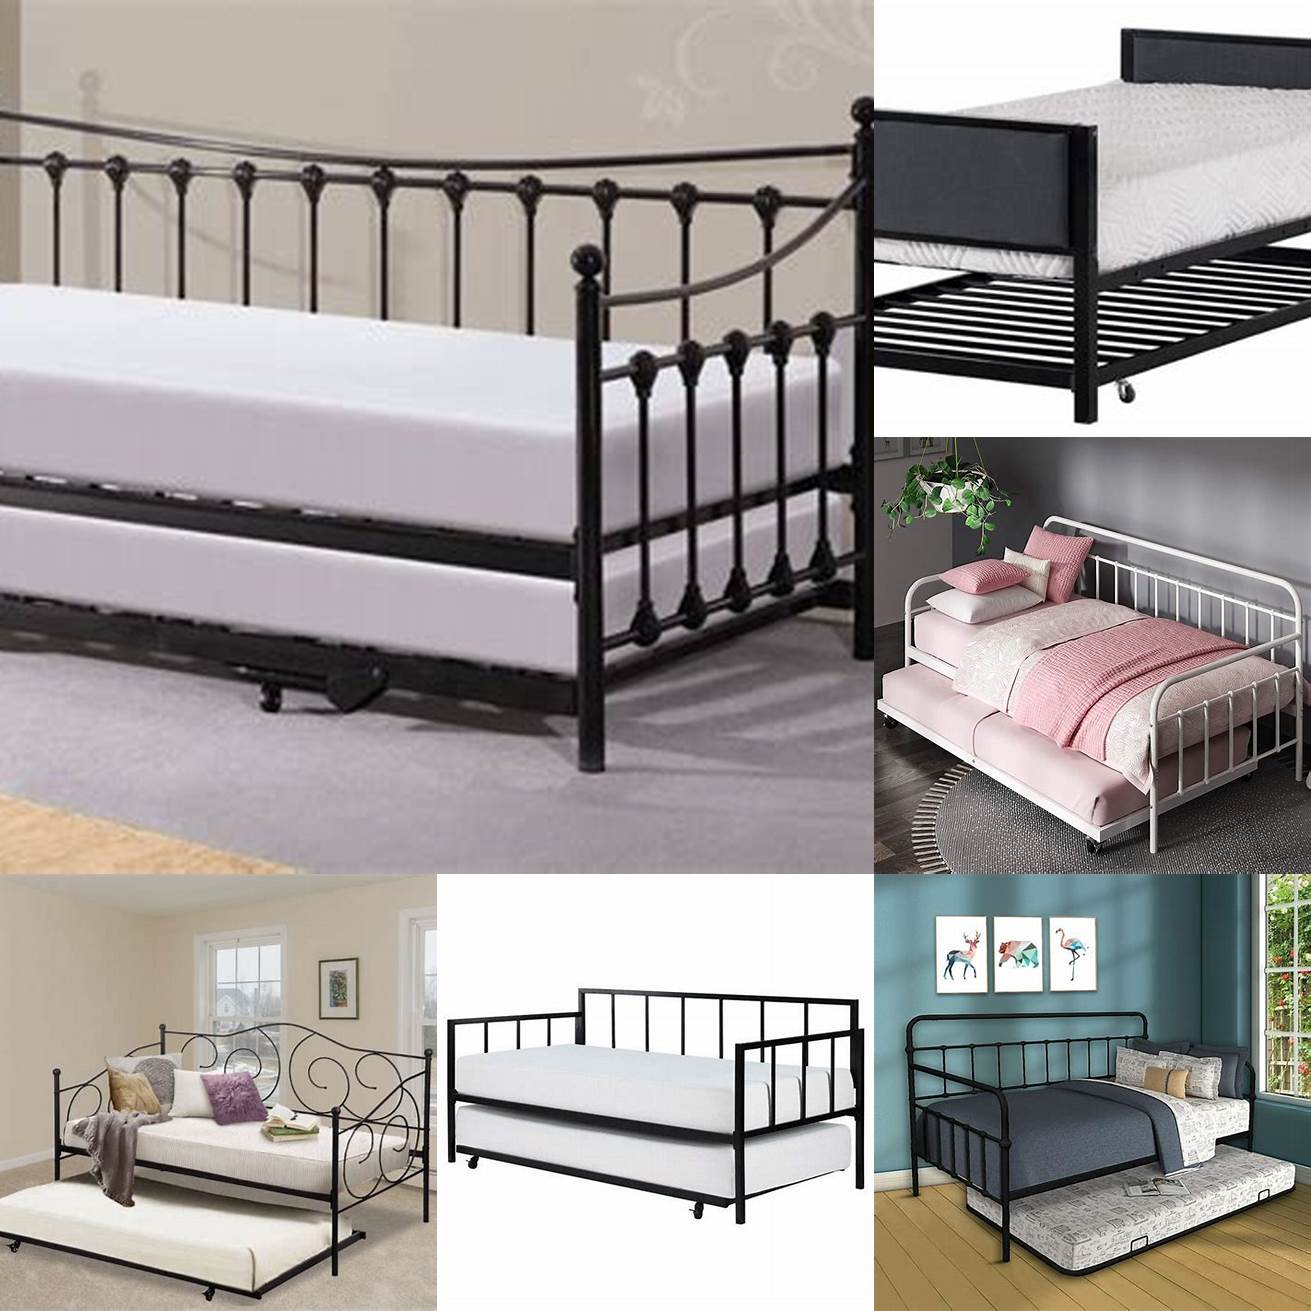 Iron trundle bed frame for extra sleeping space